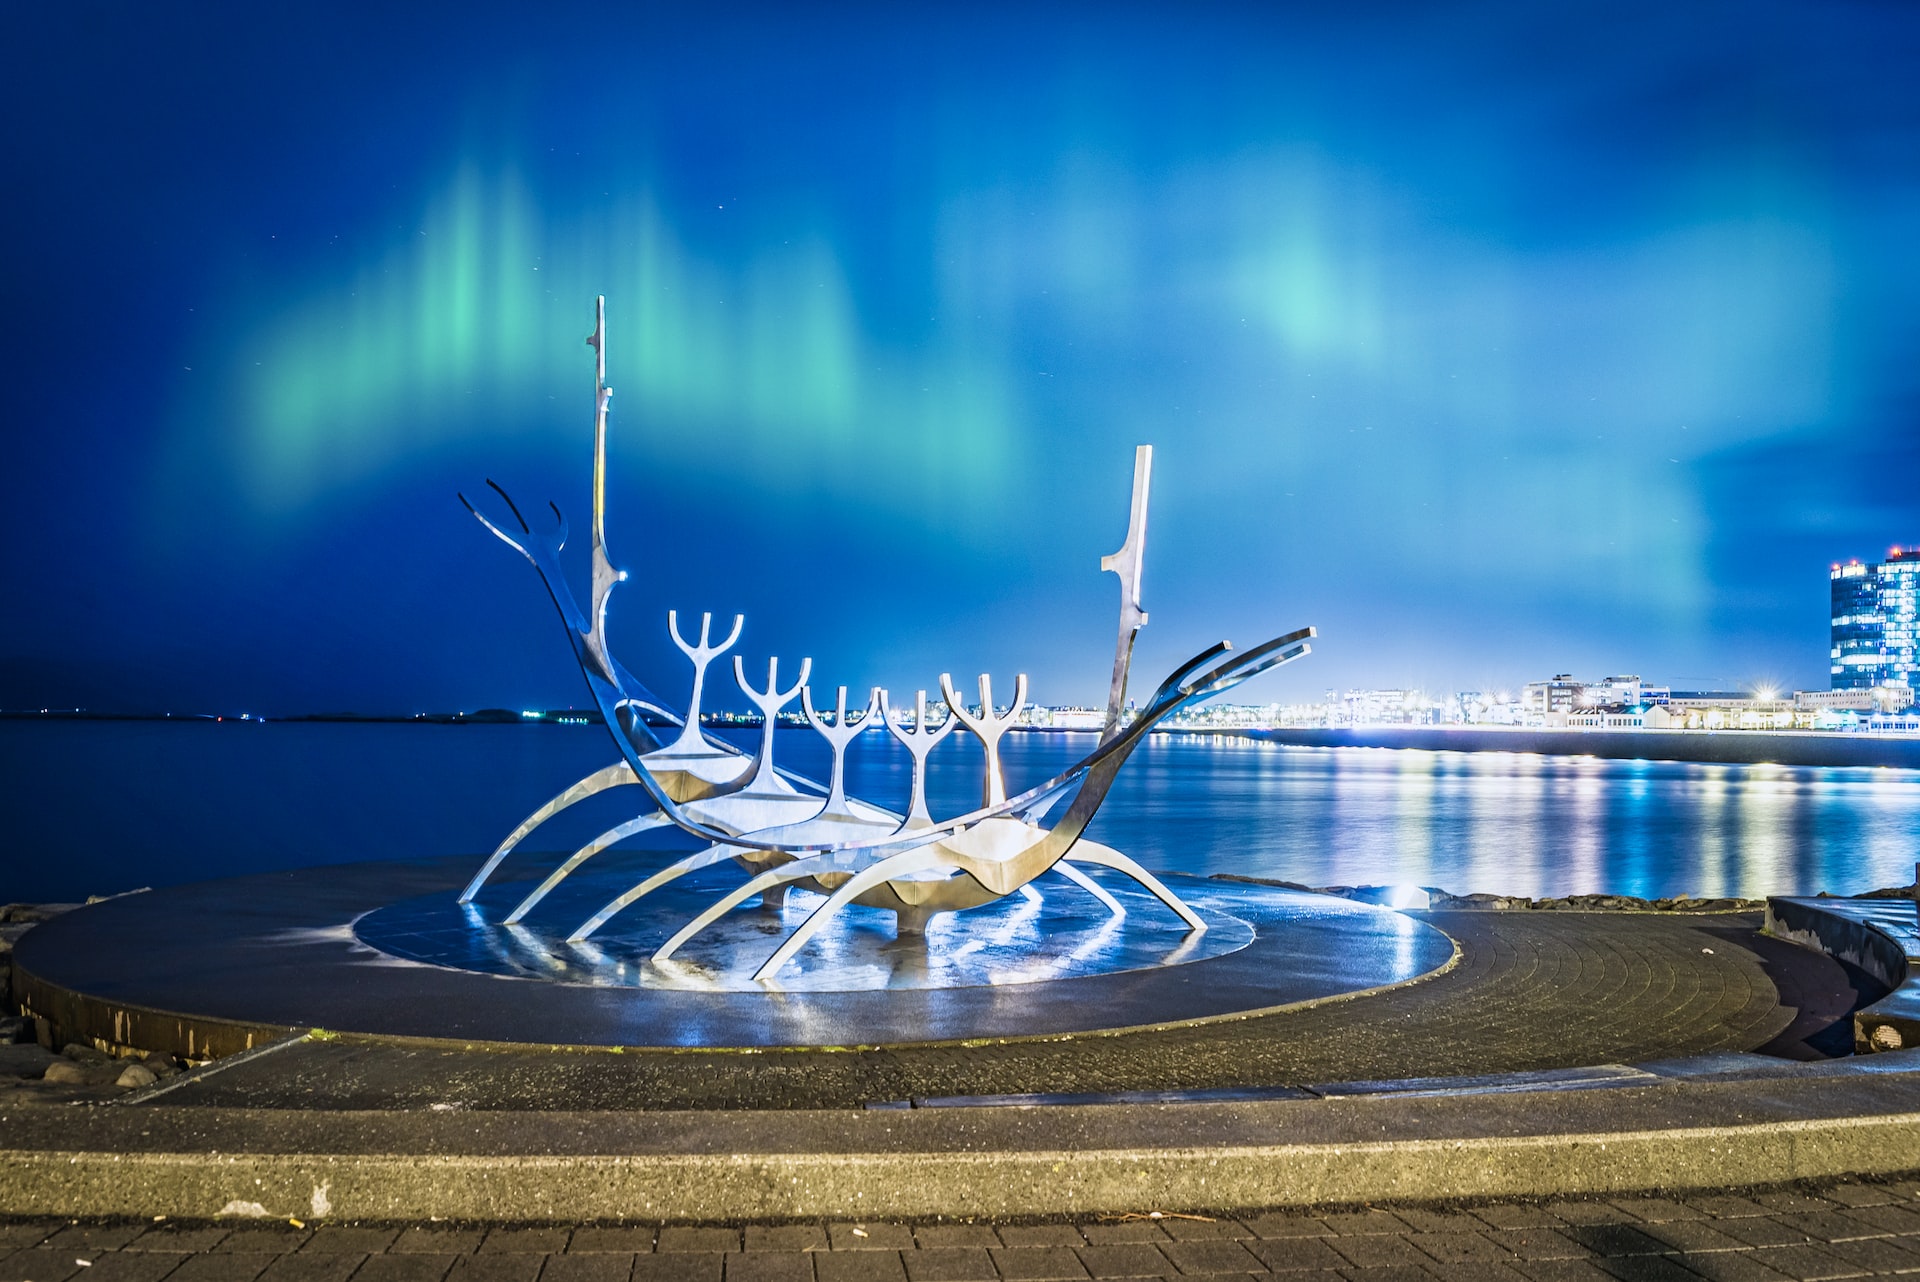 The Sun Voyager sculpture with the Northern Lights above the city of Reykjavík, Iceland.